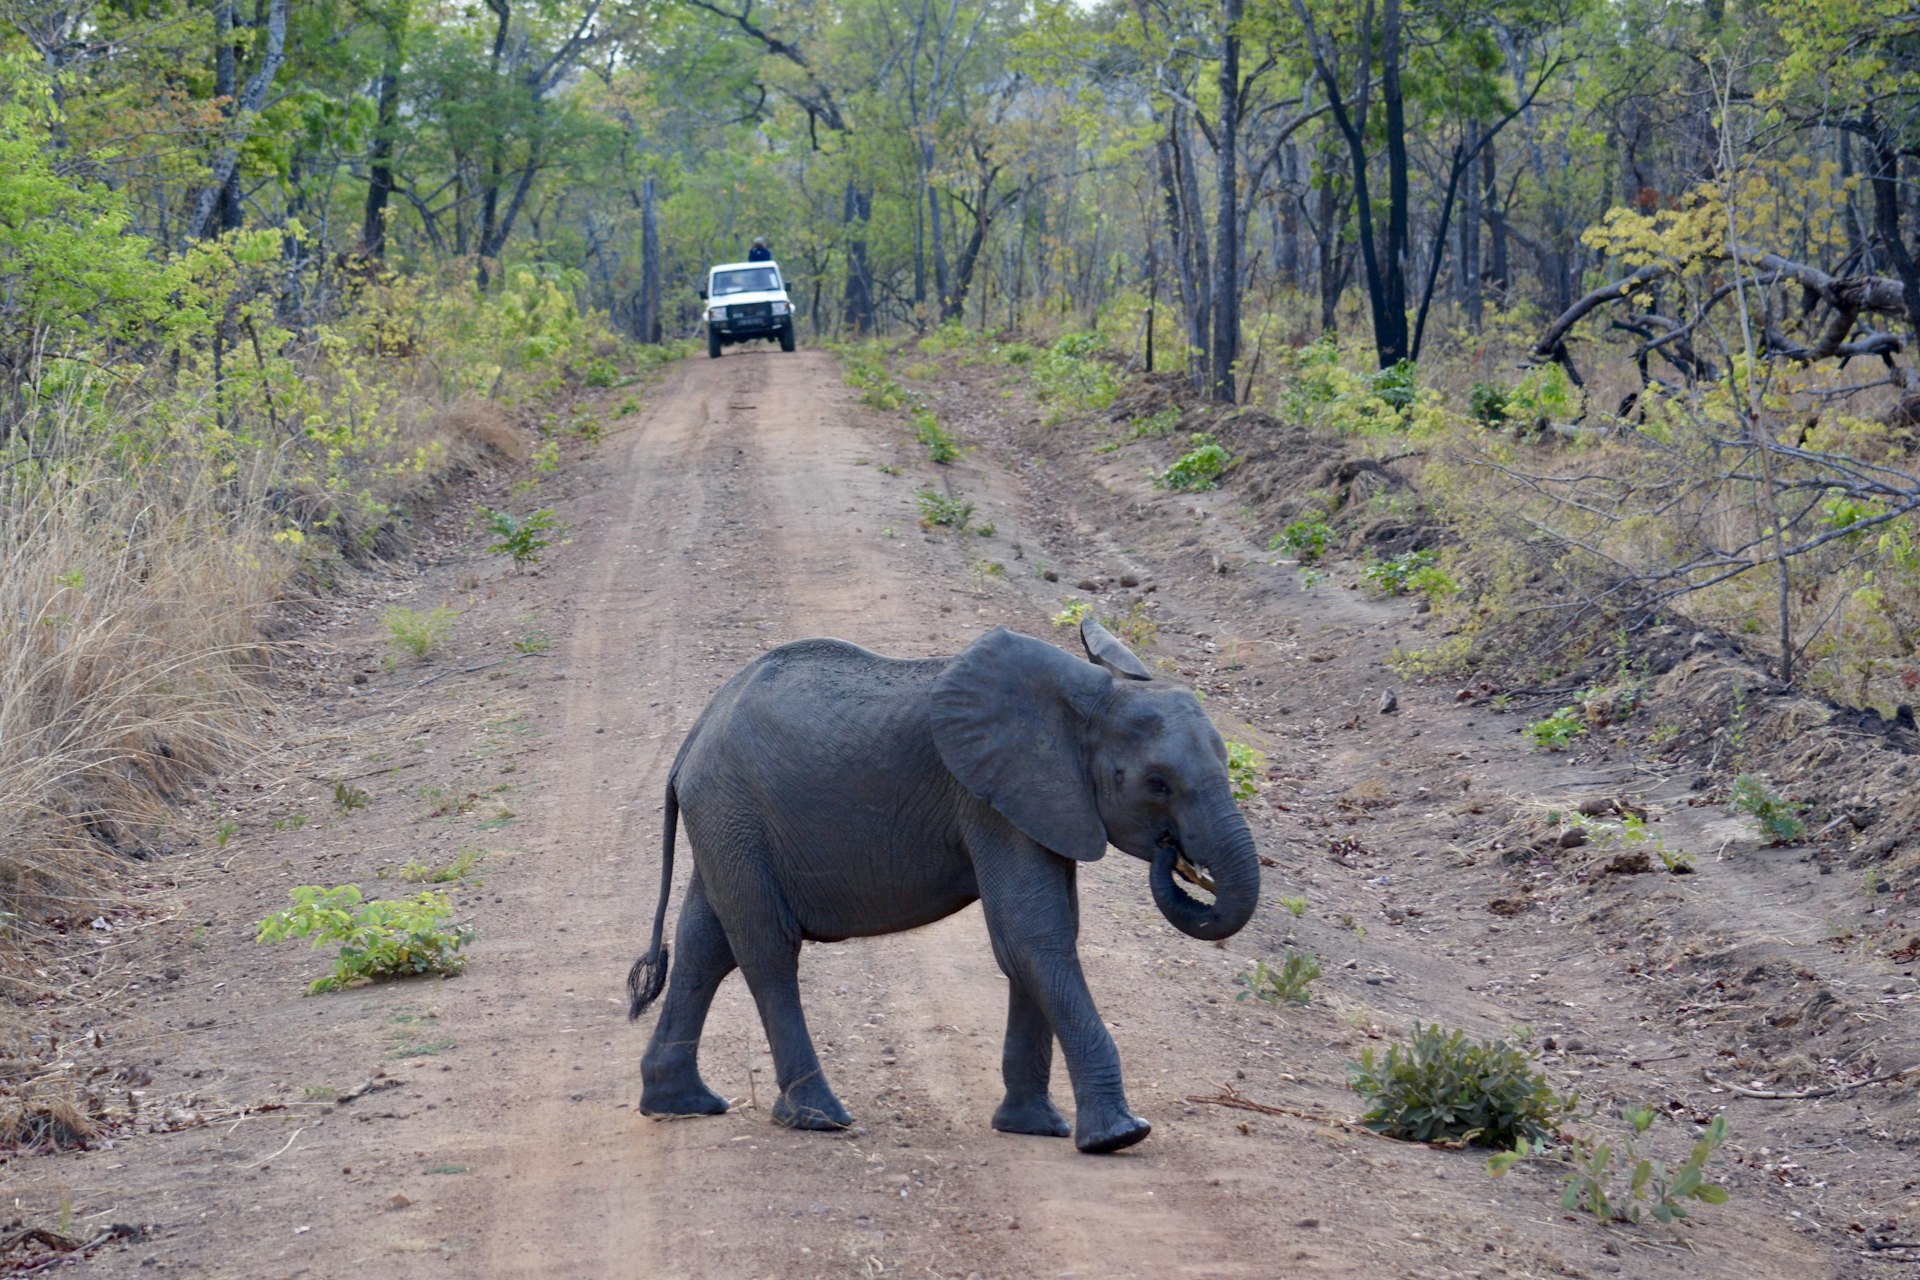 Elephant calf on the road with car in the background in Malawi's Nkhotakota Wildlife Reserve.